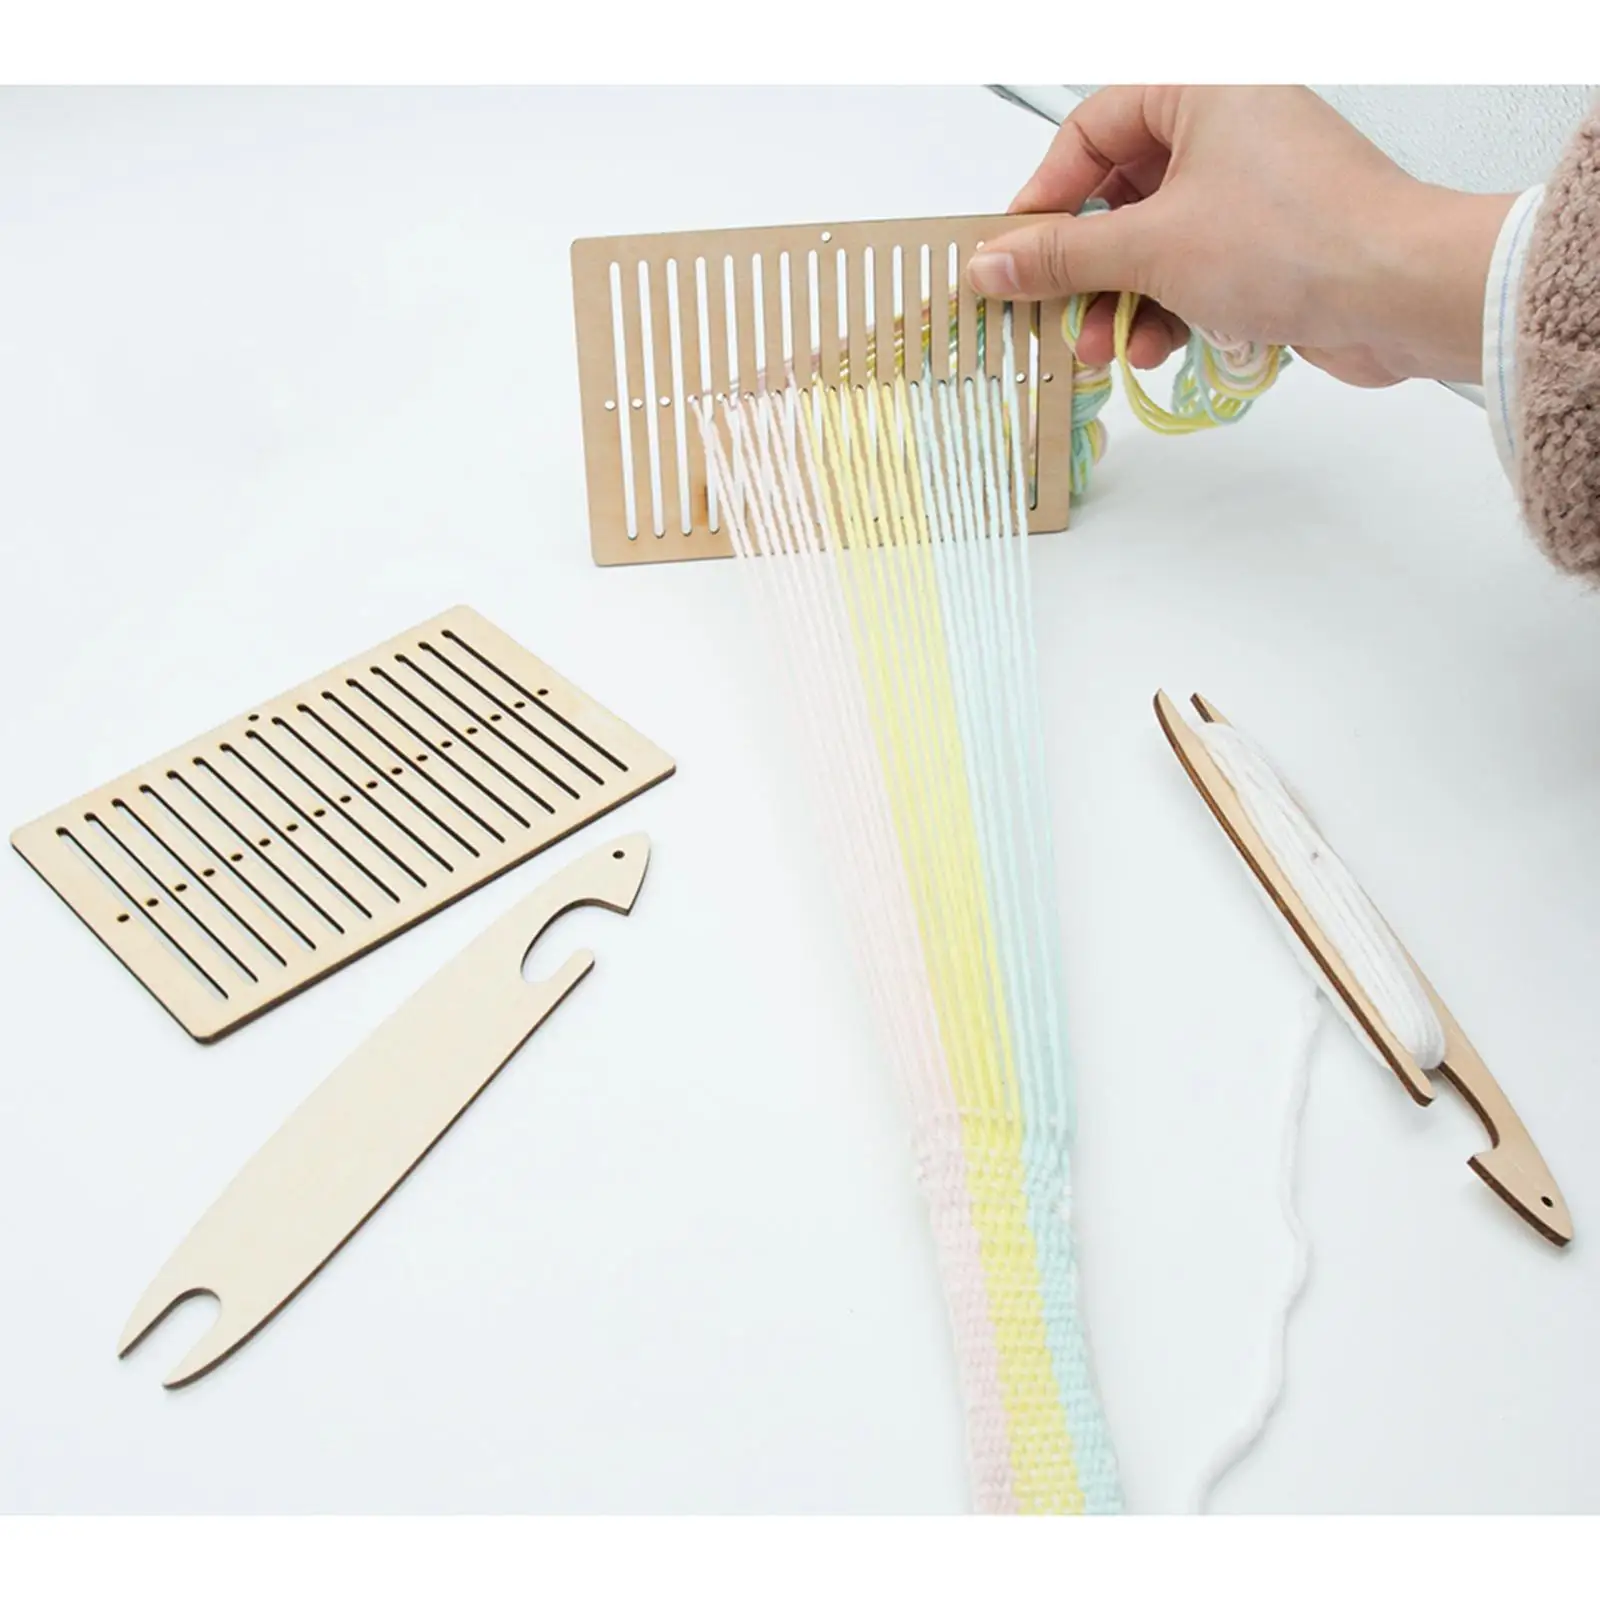  Weaving Loom Kit Suit for Woven  Lab Machine Knitting Sewing Weaving Tool